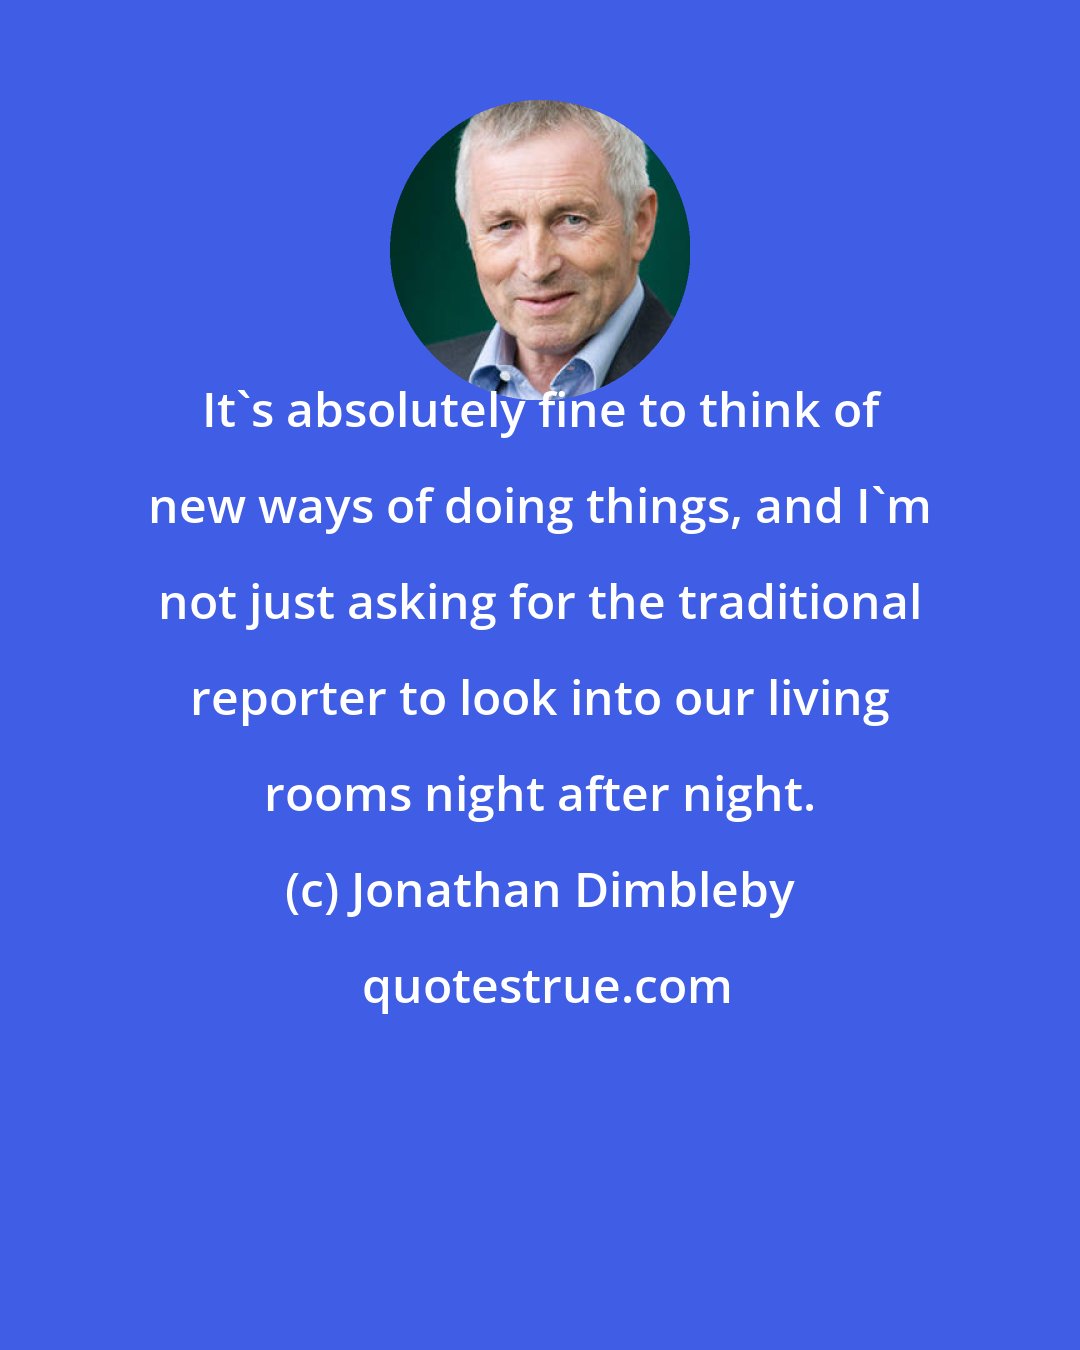 Jonathan Dimbleby: It's absolutely fine to think of new ways of doing things, and I'm not just asking for the traditional reporter to look into our living rooms night after night.